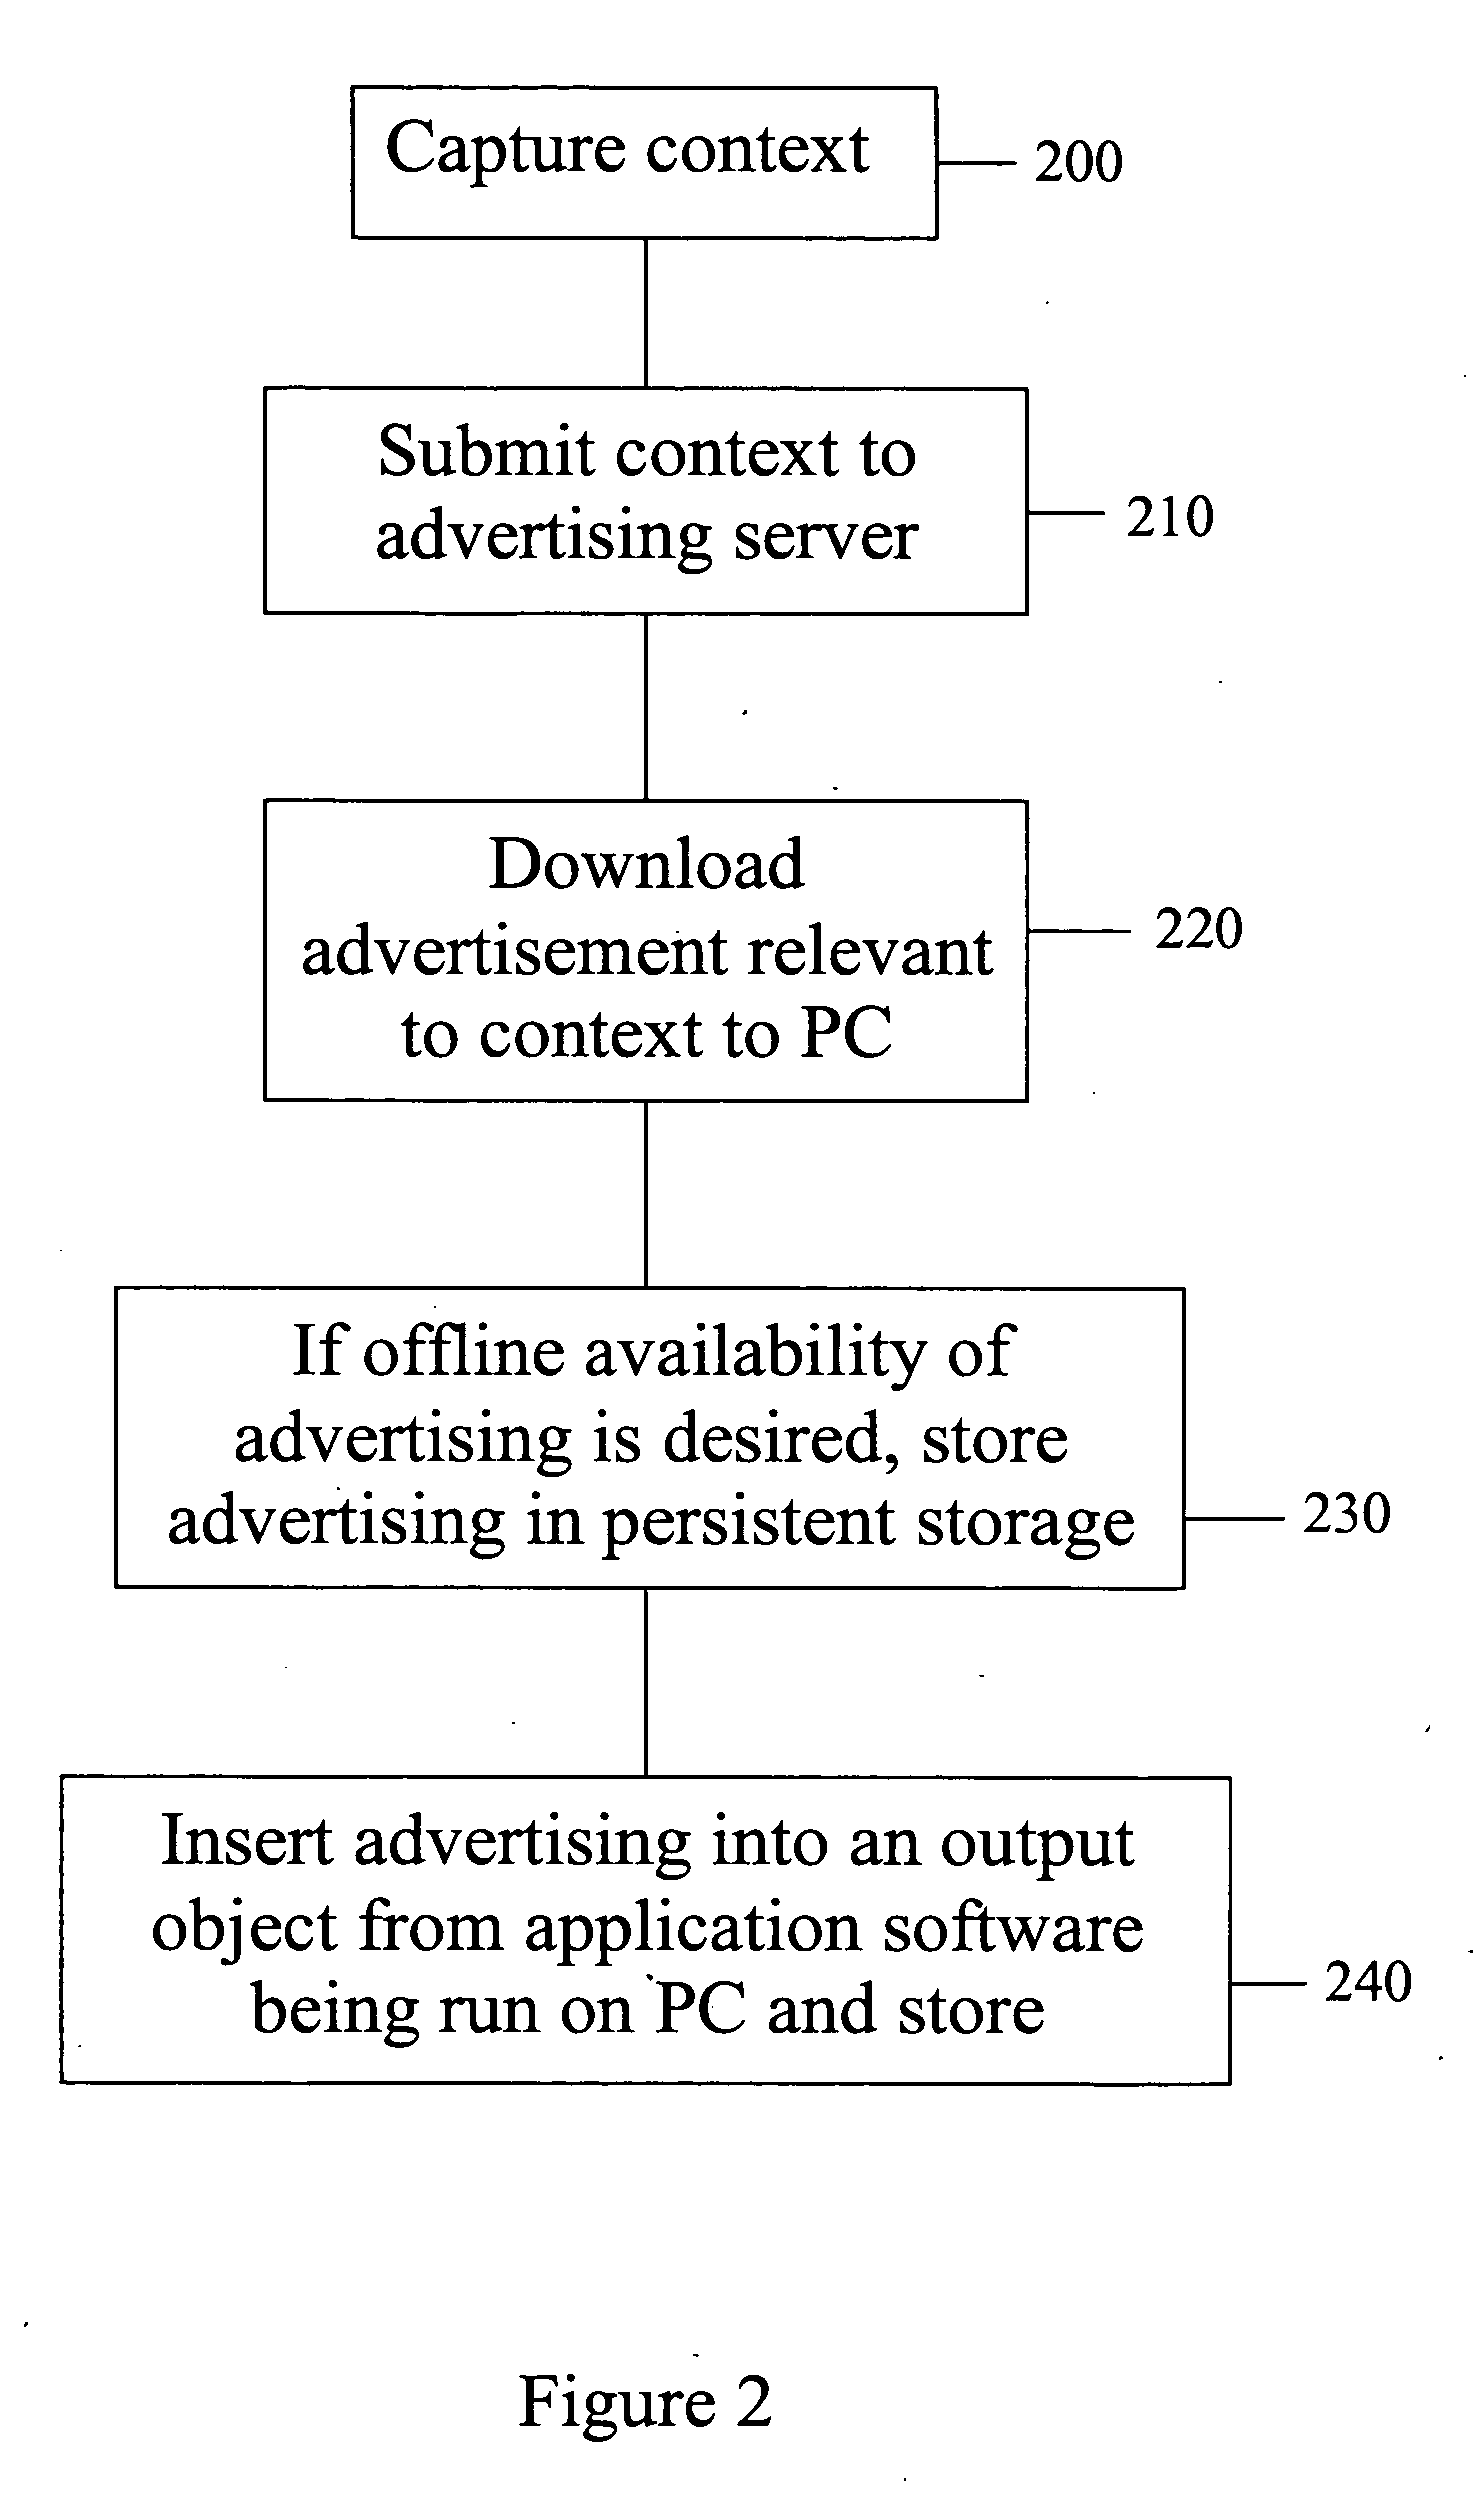 Techniques for magazine like presentation of advertisment using computers